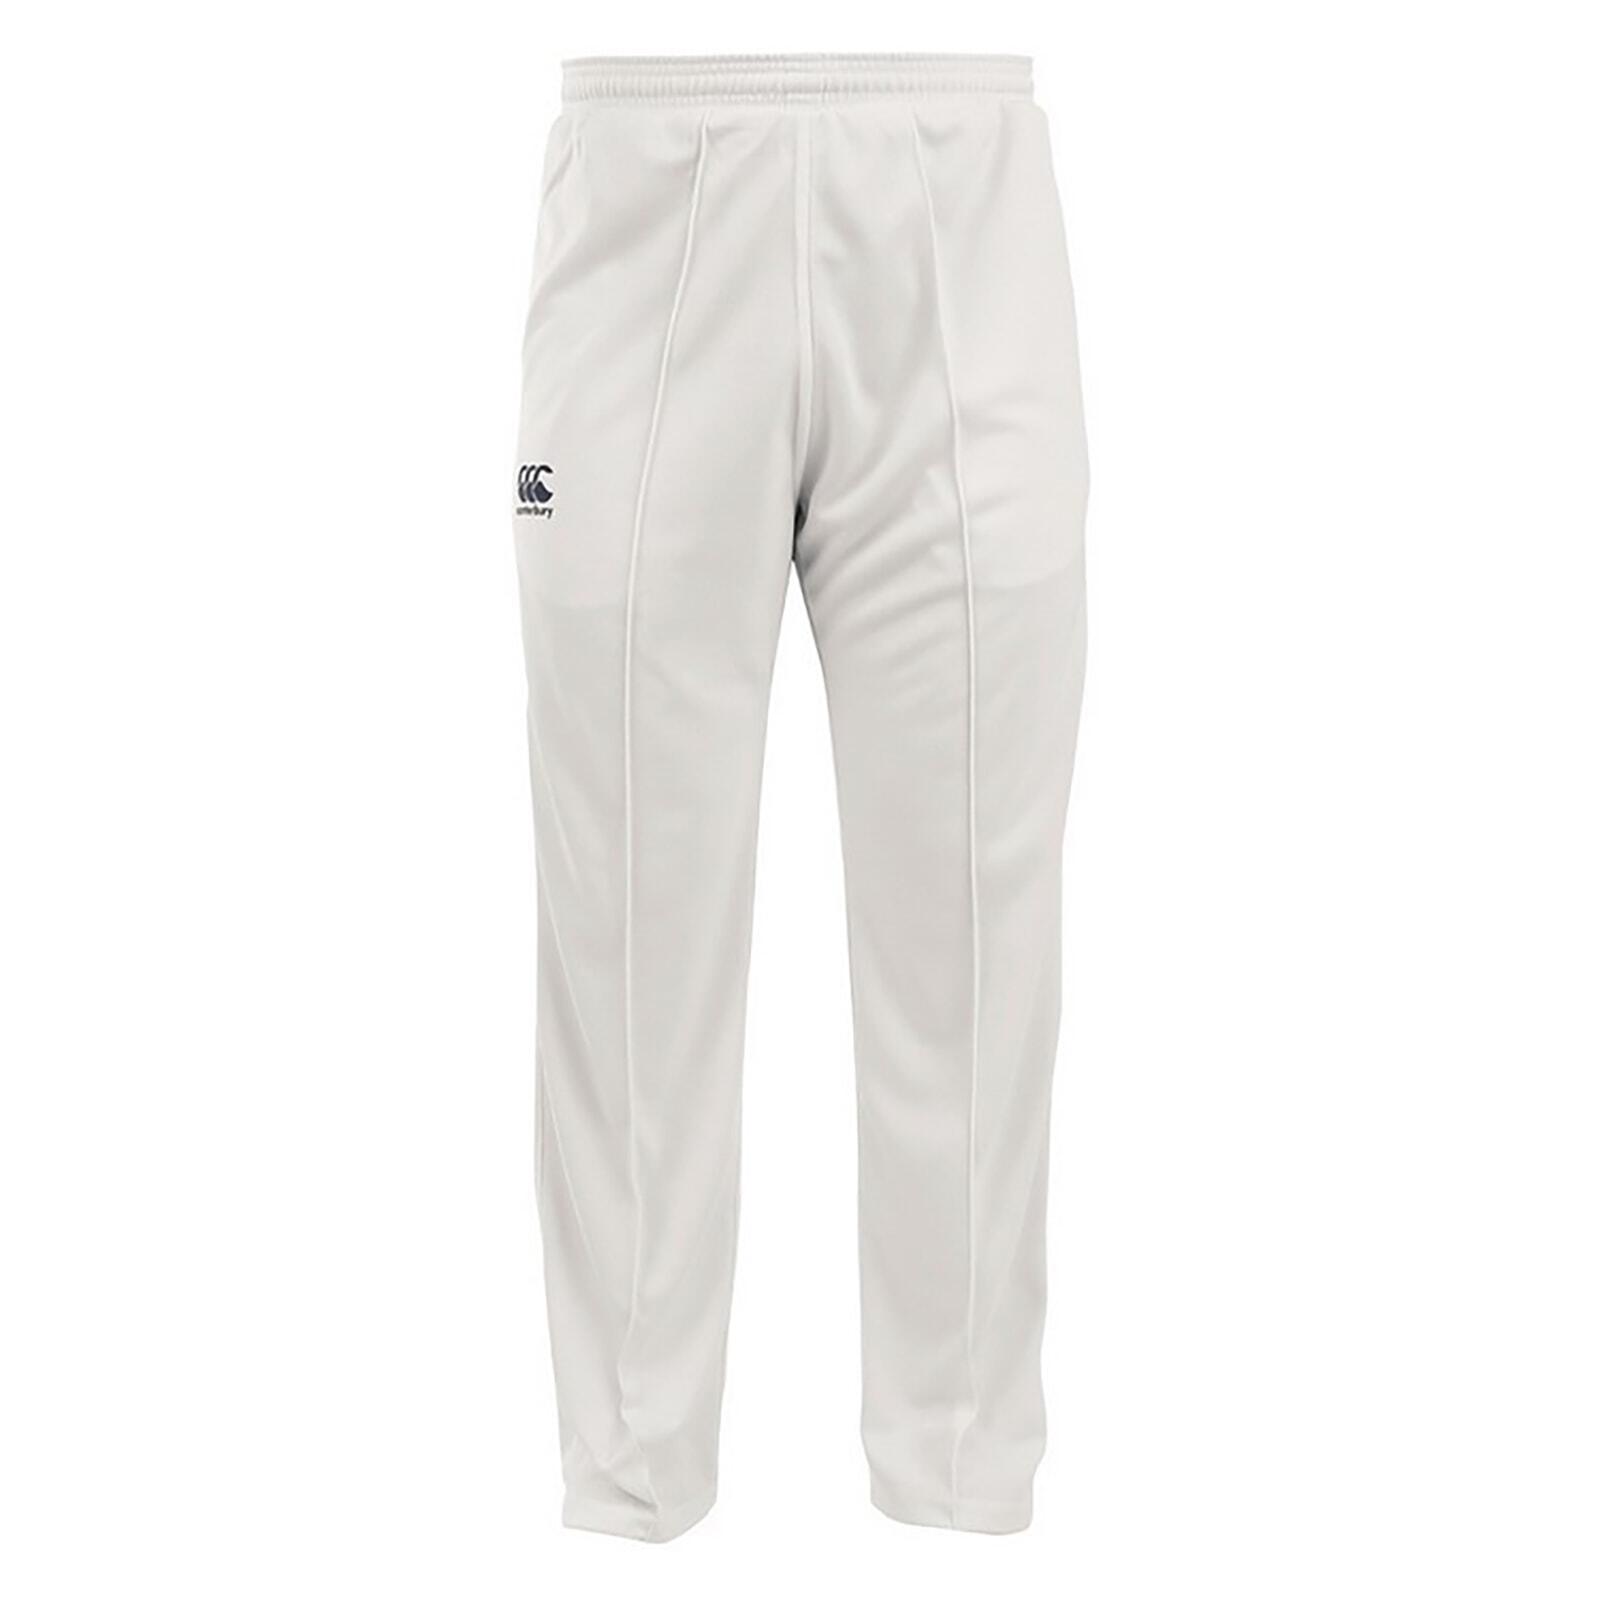 Cricket trousers  Cheap personalised embroidered workwear and uniforms